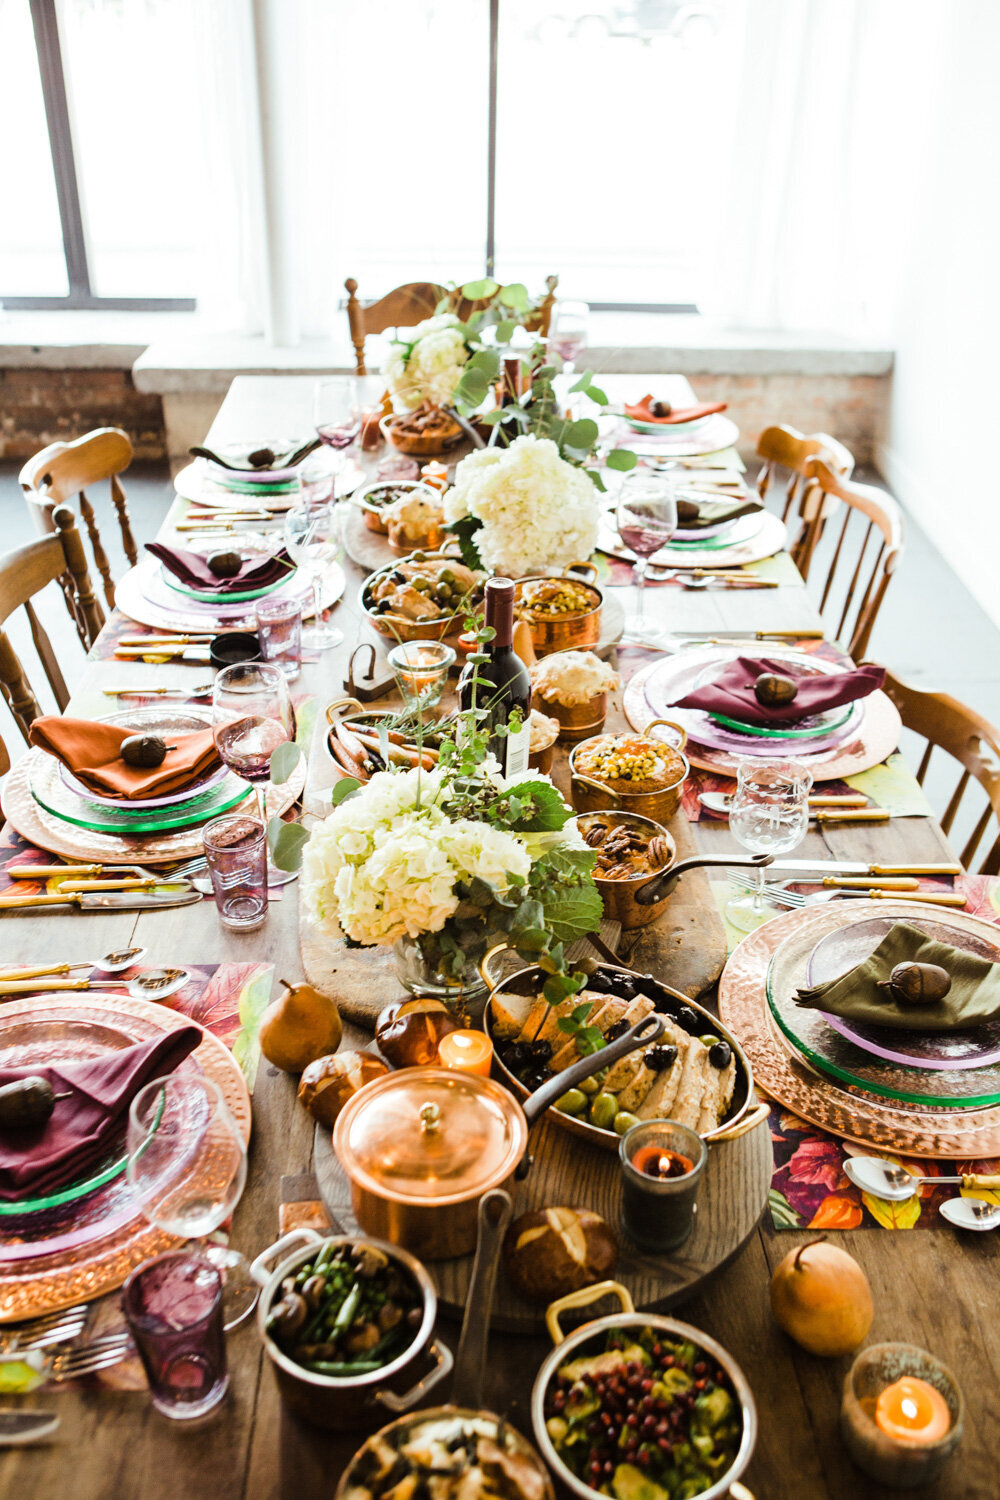 Rectangular dining table with foods, plates, utensils, glasses and floral centerpiece